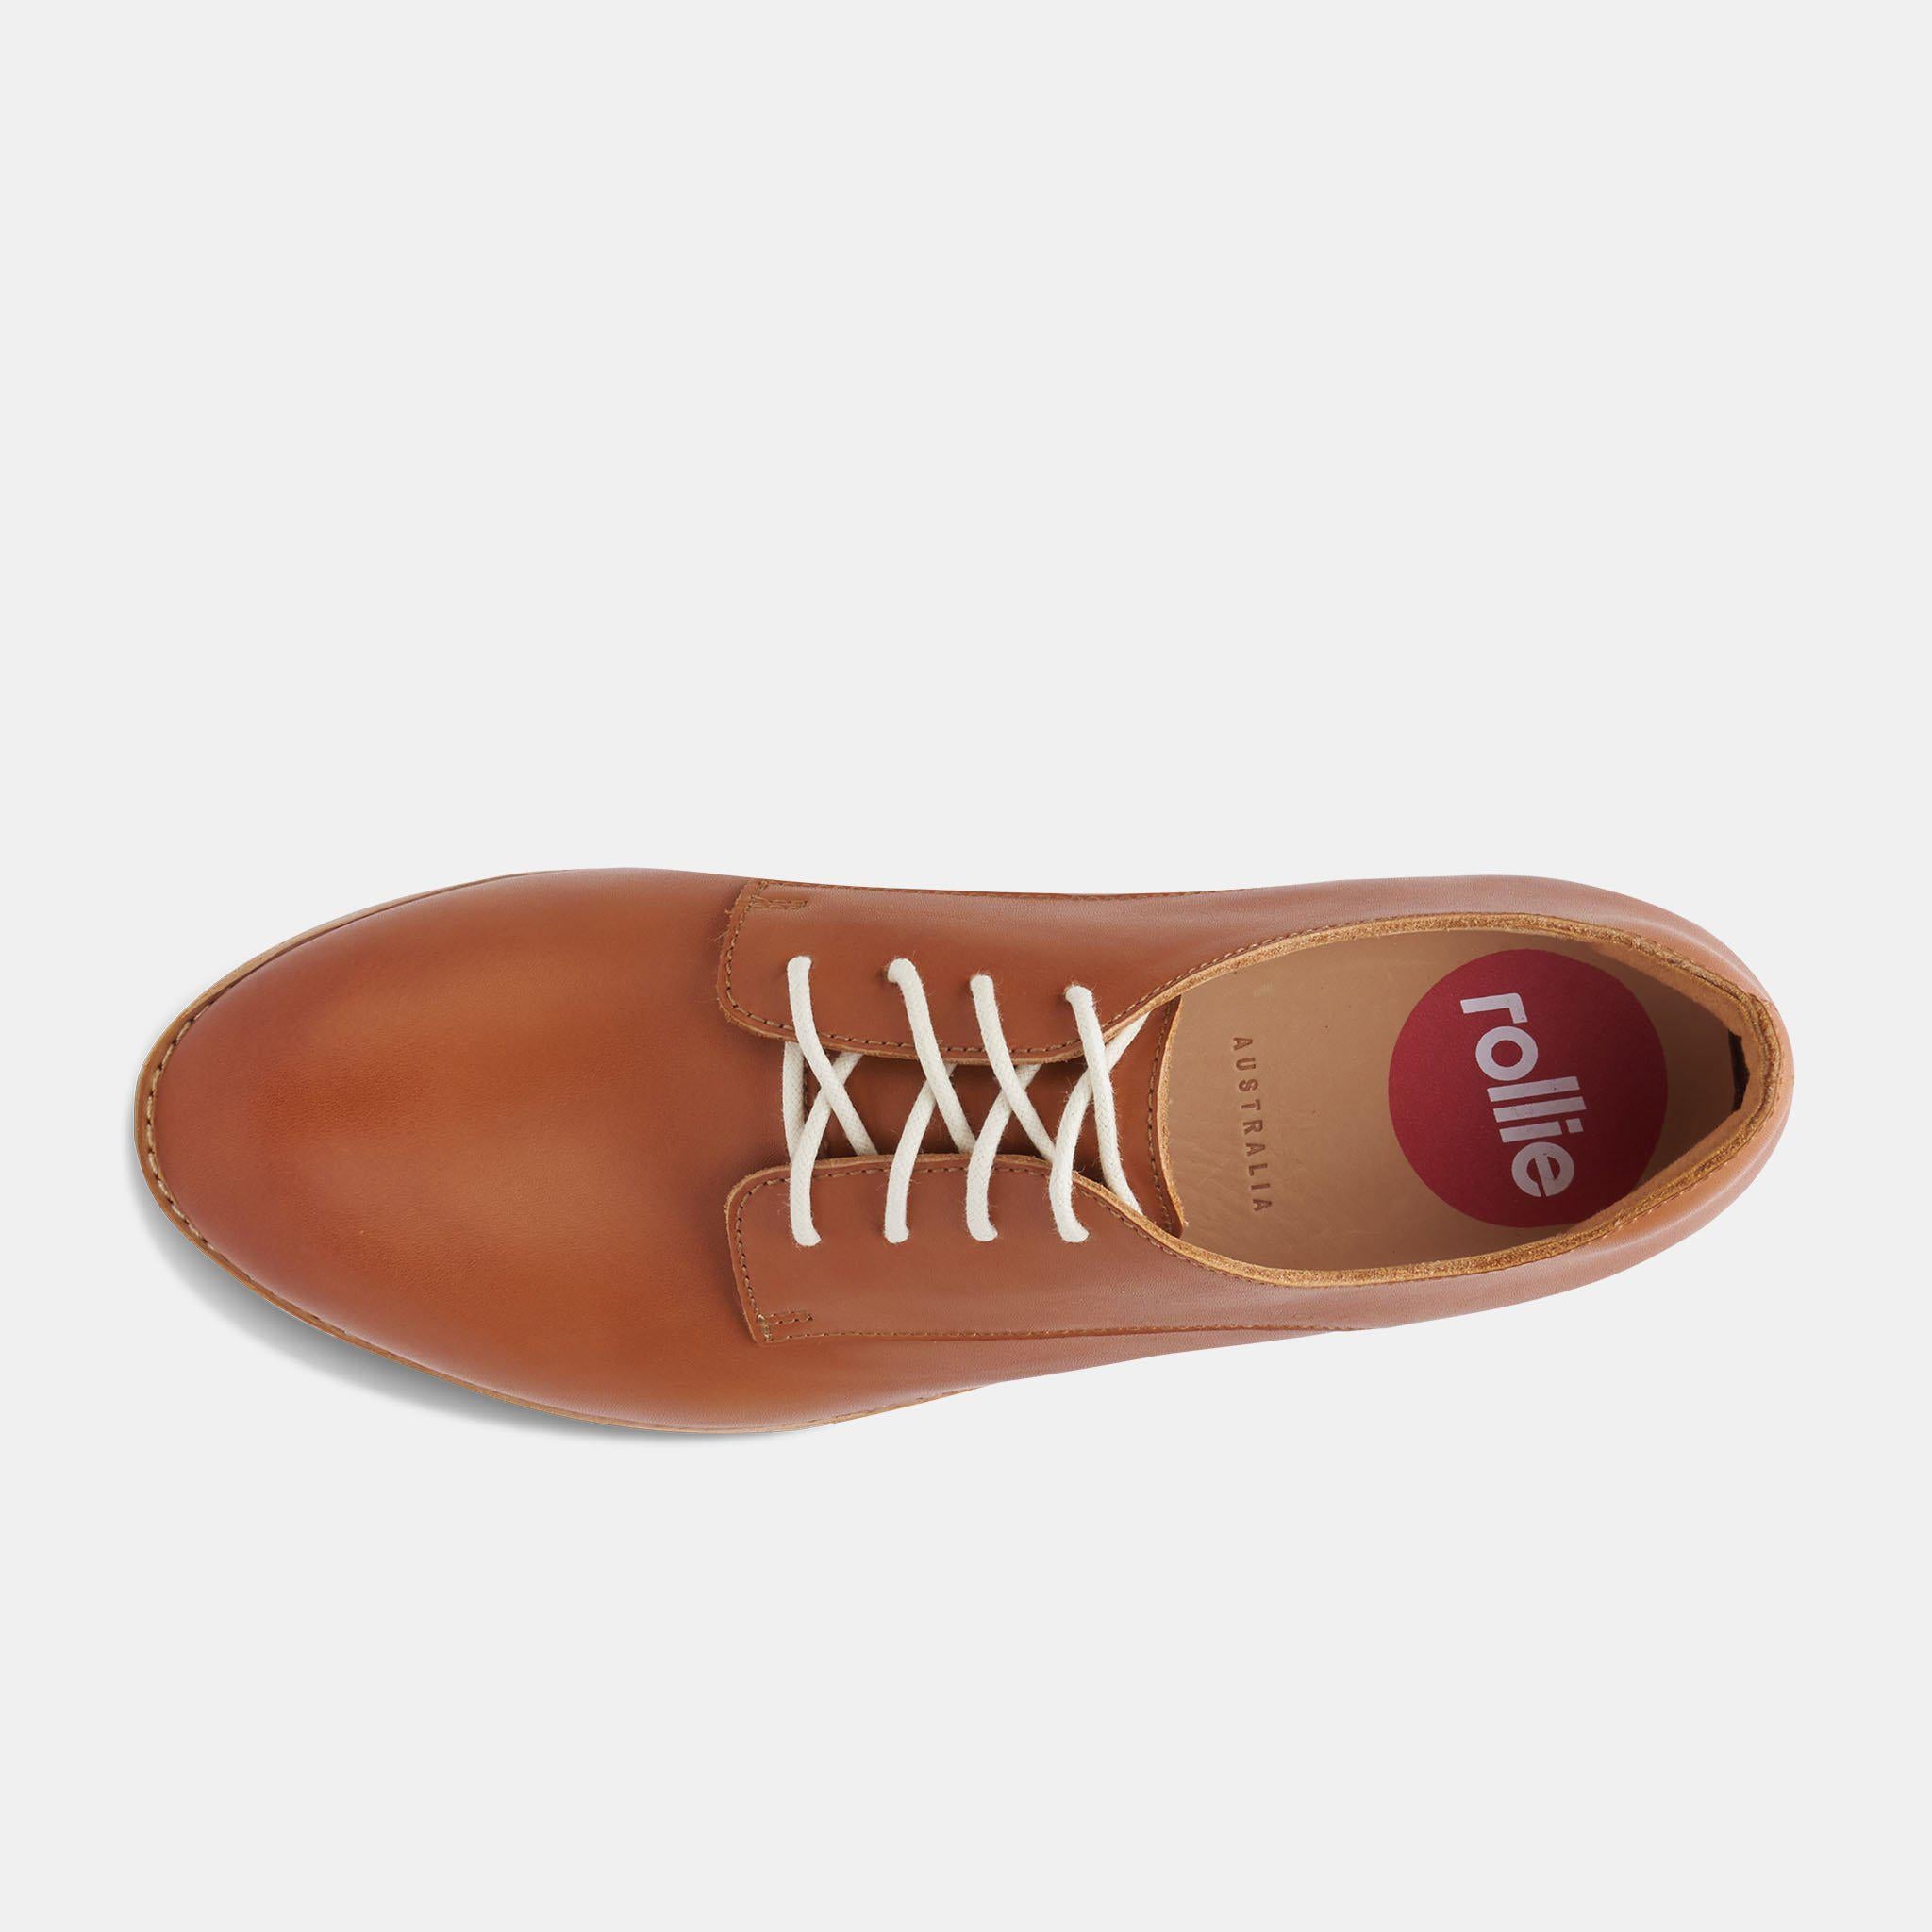 Derby Cognac-Shoes-Rollie-The Bay Room